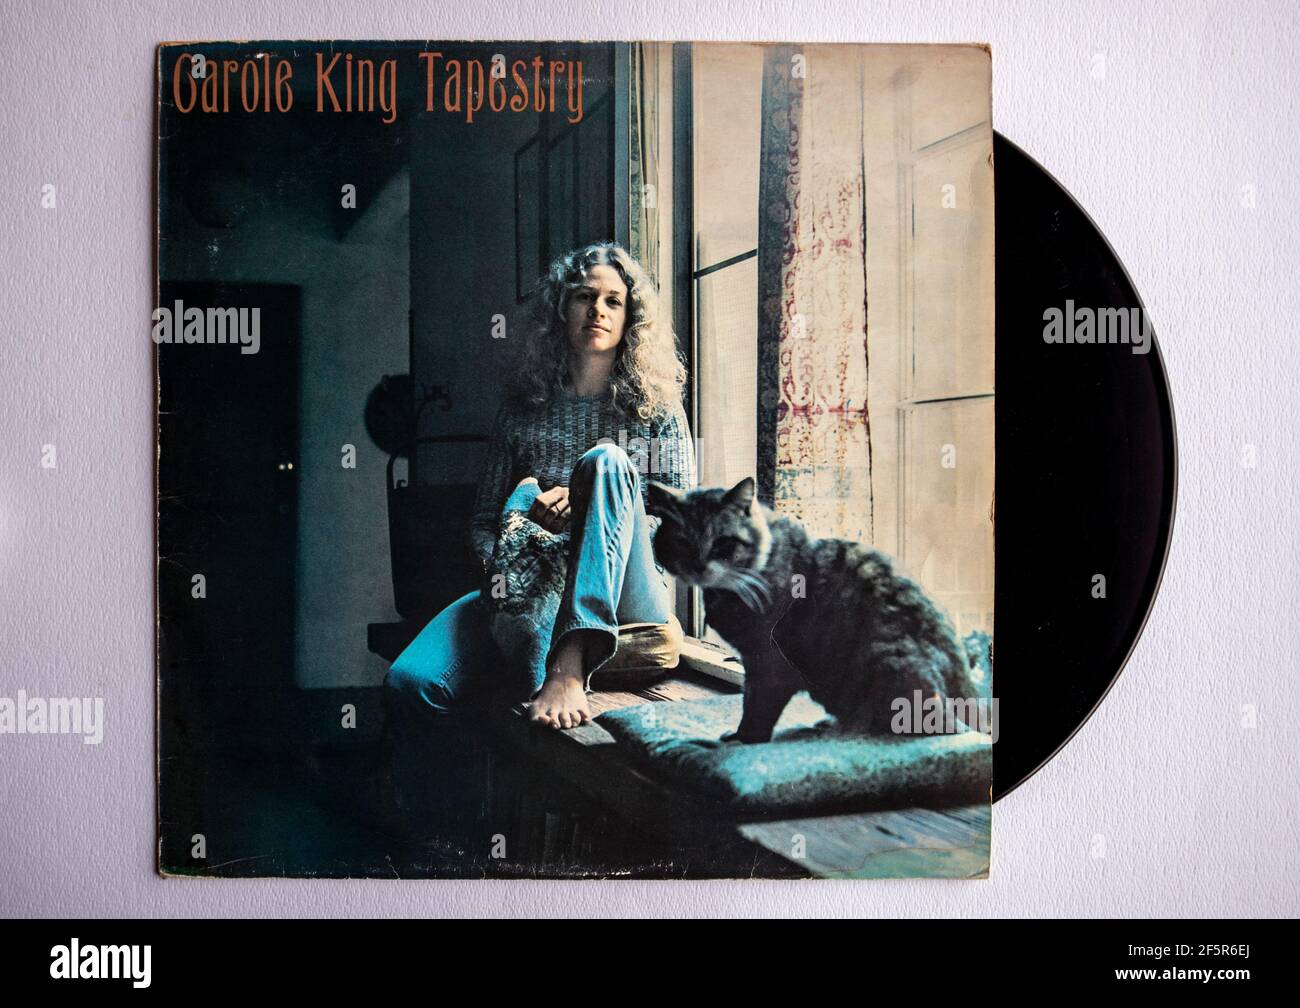 LP cover and vinyl of the Tapestry album by Carole King, which was